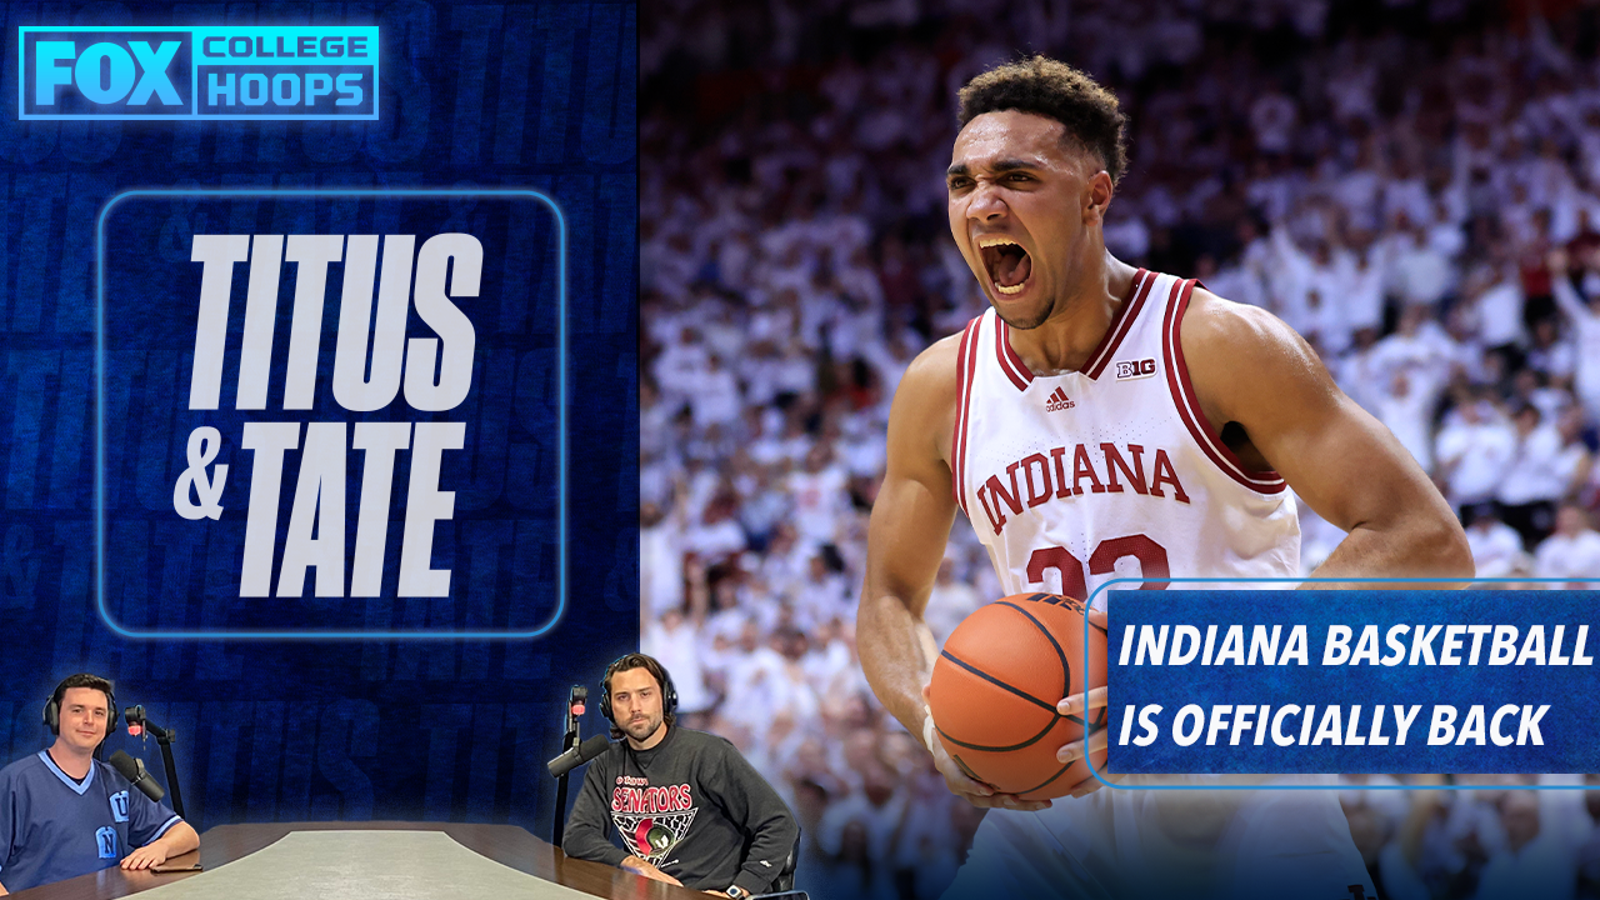 Indiana Hoosiers Basketball is officially good